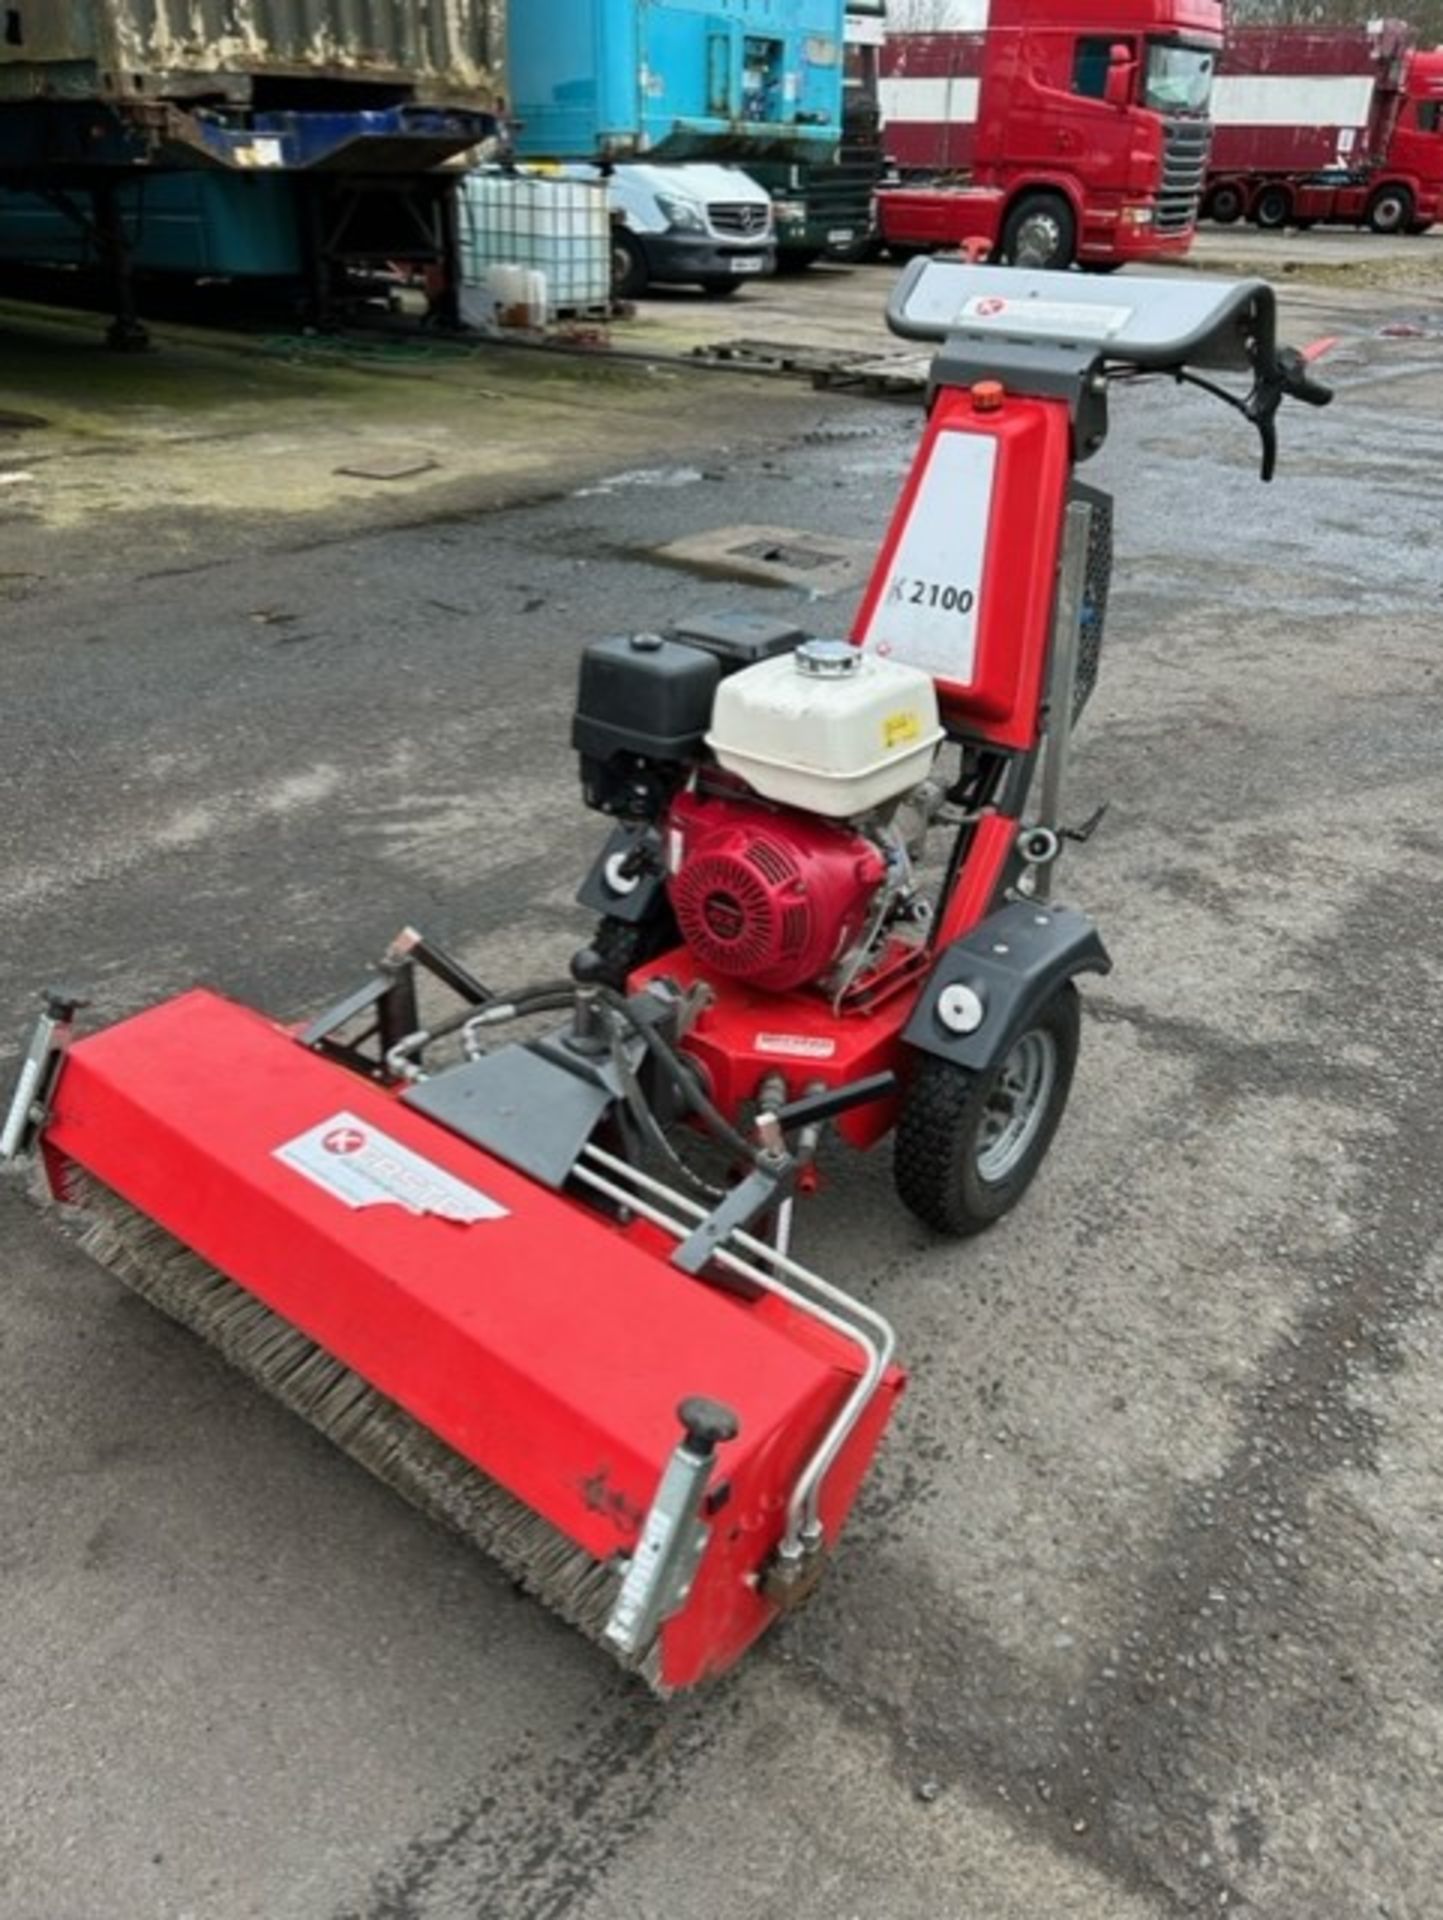 2019 Kersten k2100 hydraulic 2 wheeled tractor unit with sweeper attachment, kerb sweeper attachment